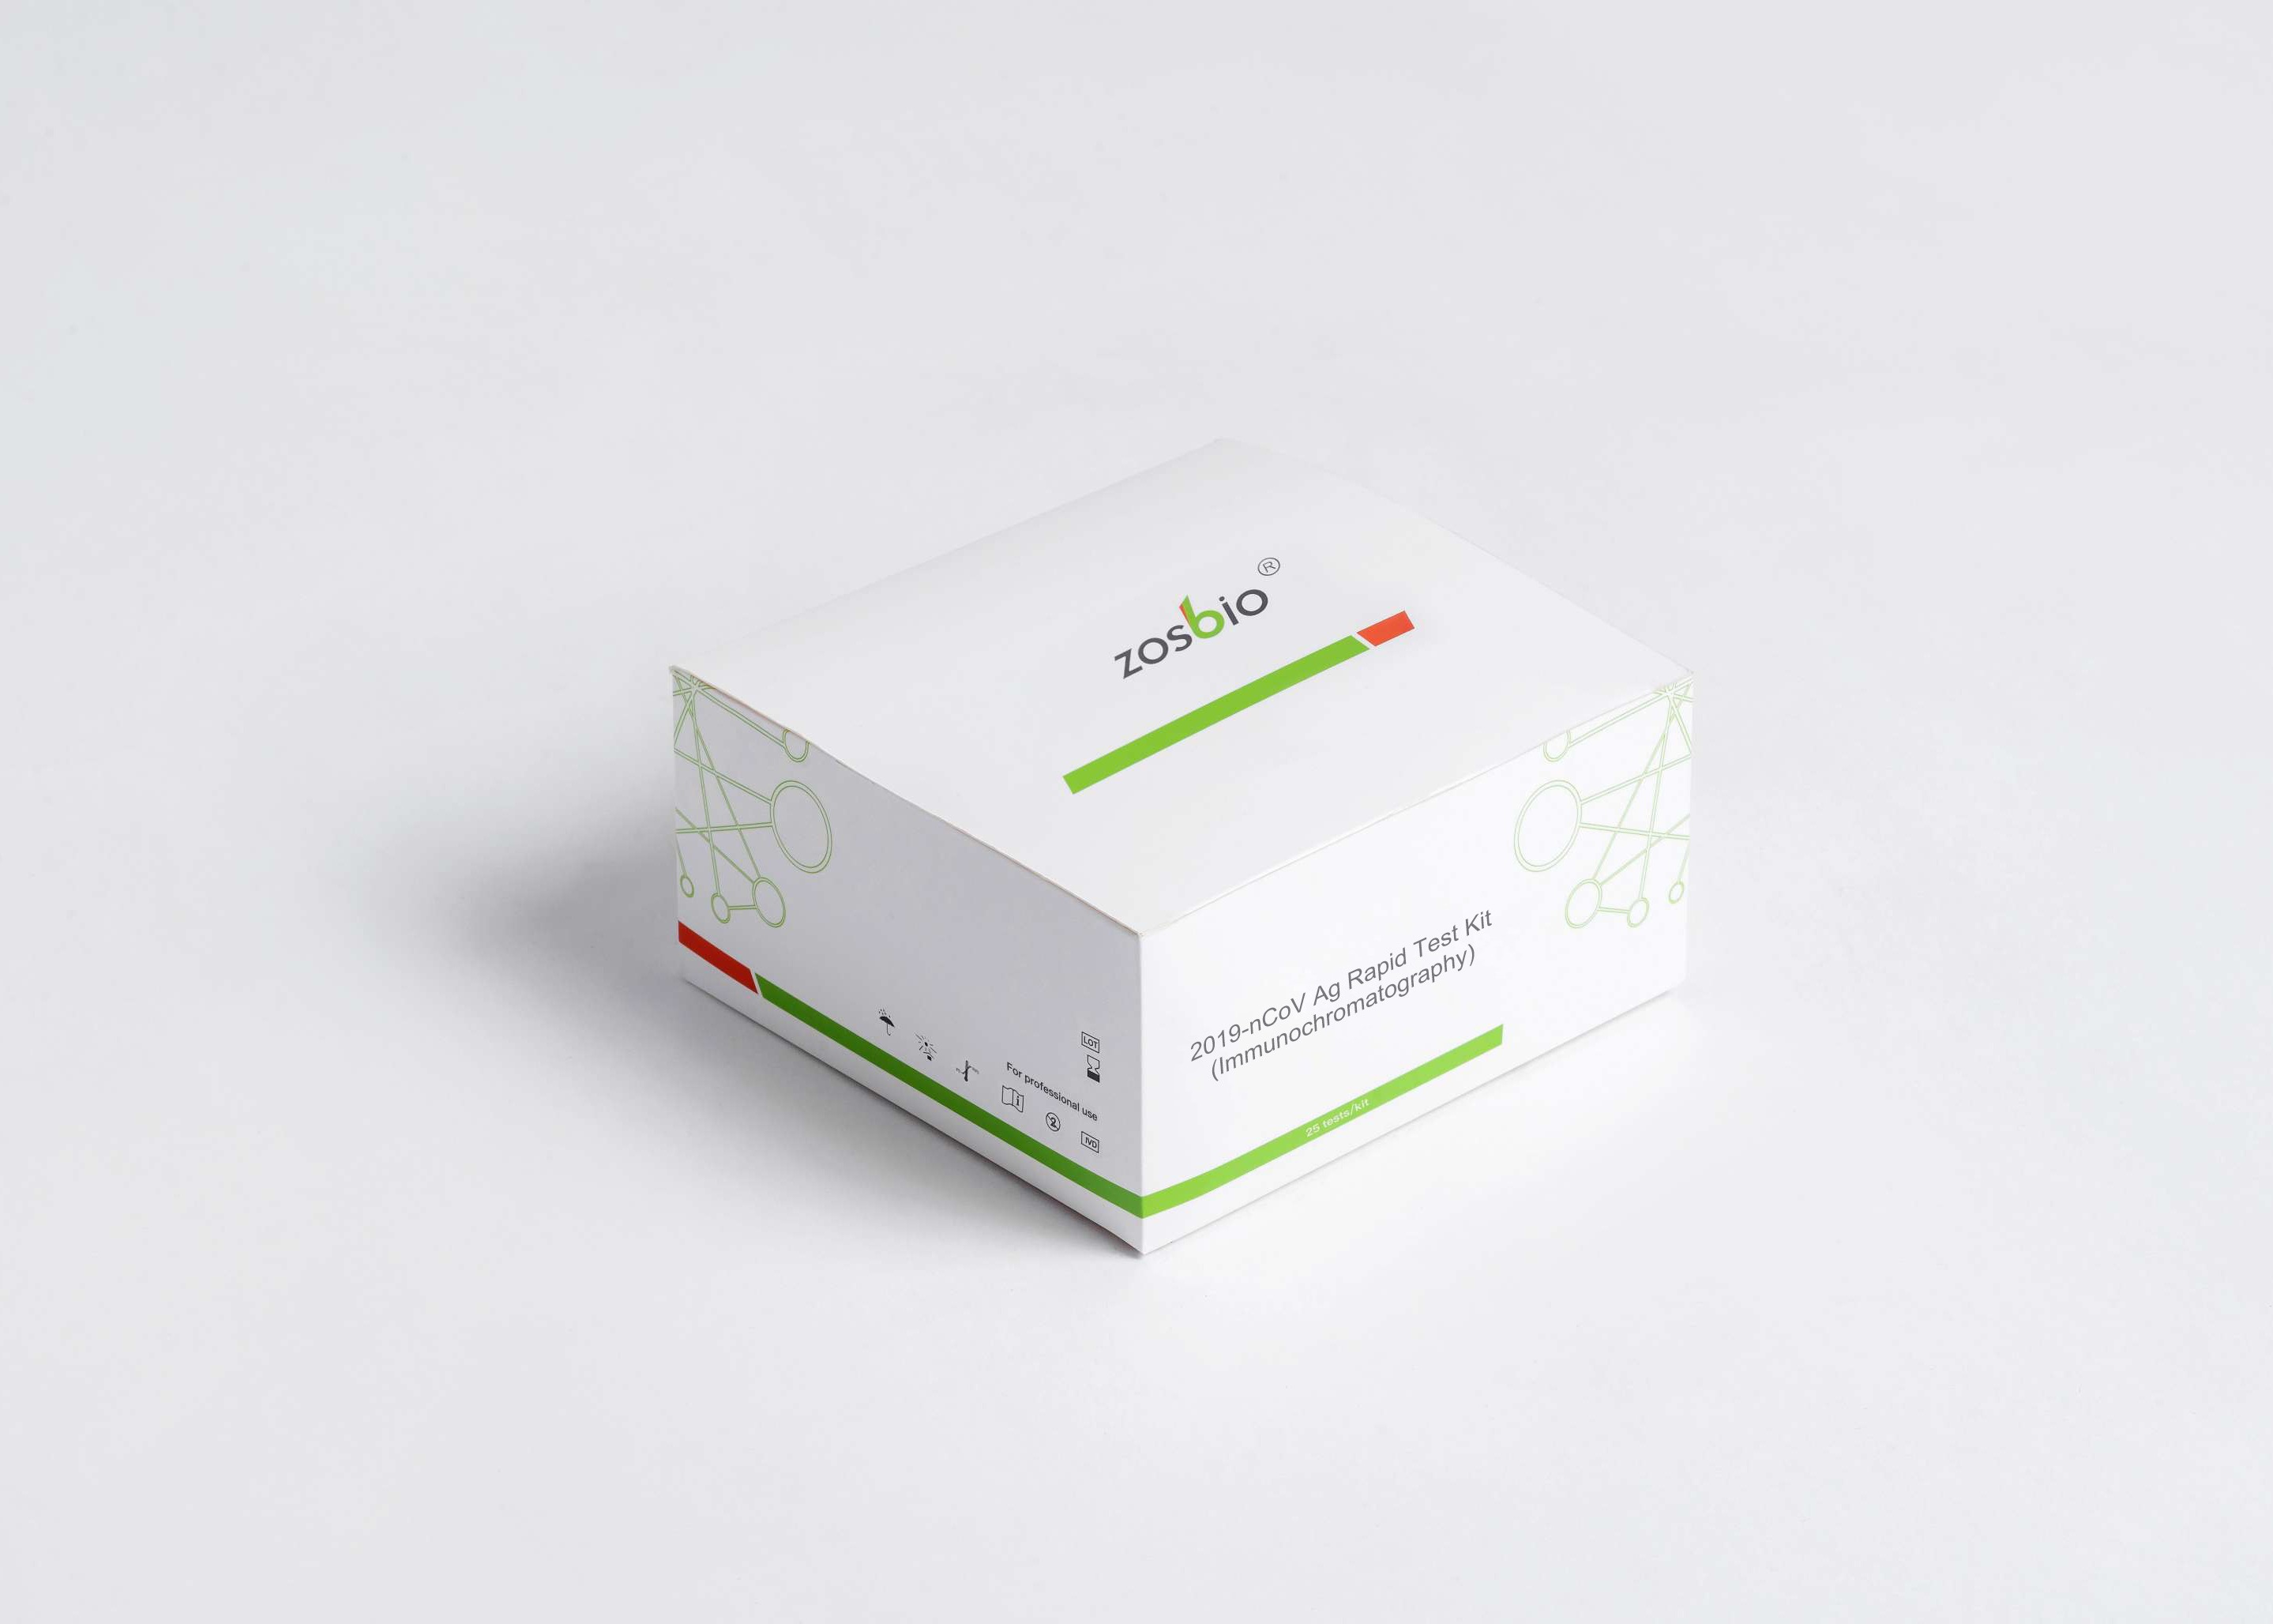  96.67% Sensitivity Ag Rapid Test Kit Lateral Flow Immunochromatography Manufactures